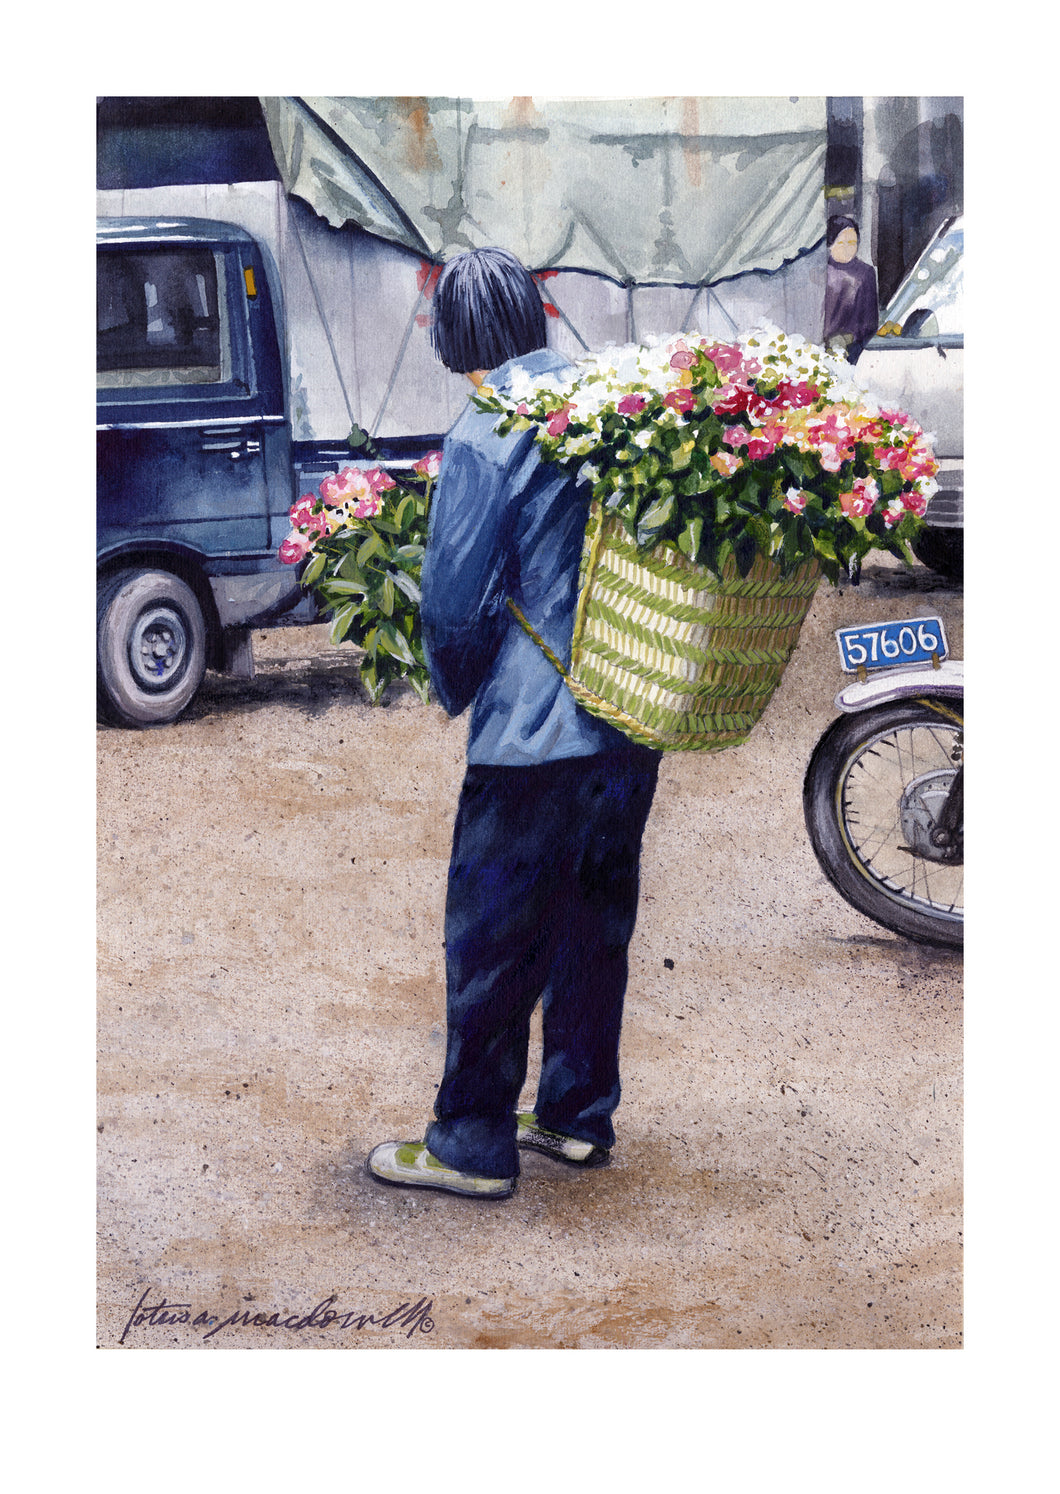 Flower Vendor: Tonglii, China- Limited Edition Giclee Print.  Flowers, anyone? This charming image is created from a full color watercolor painting by Lotus MacDowell, inspired by her travels to China. The title, 